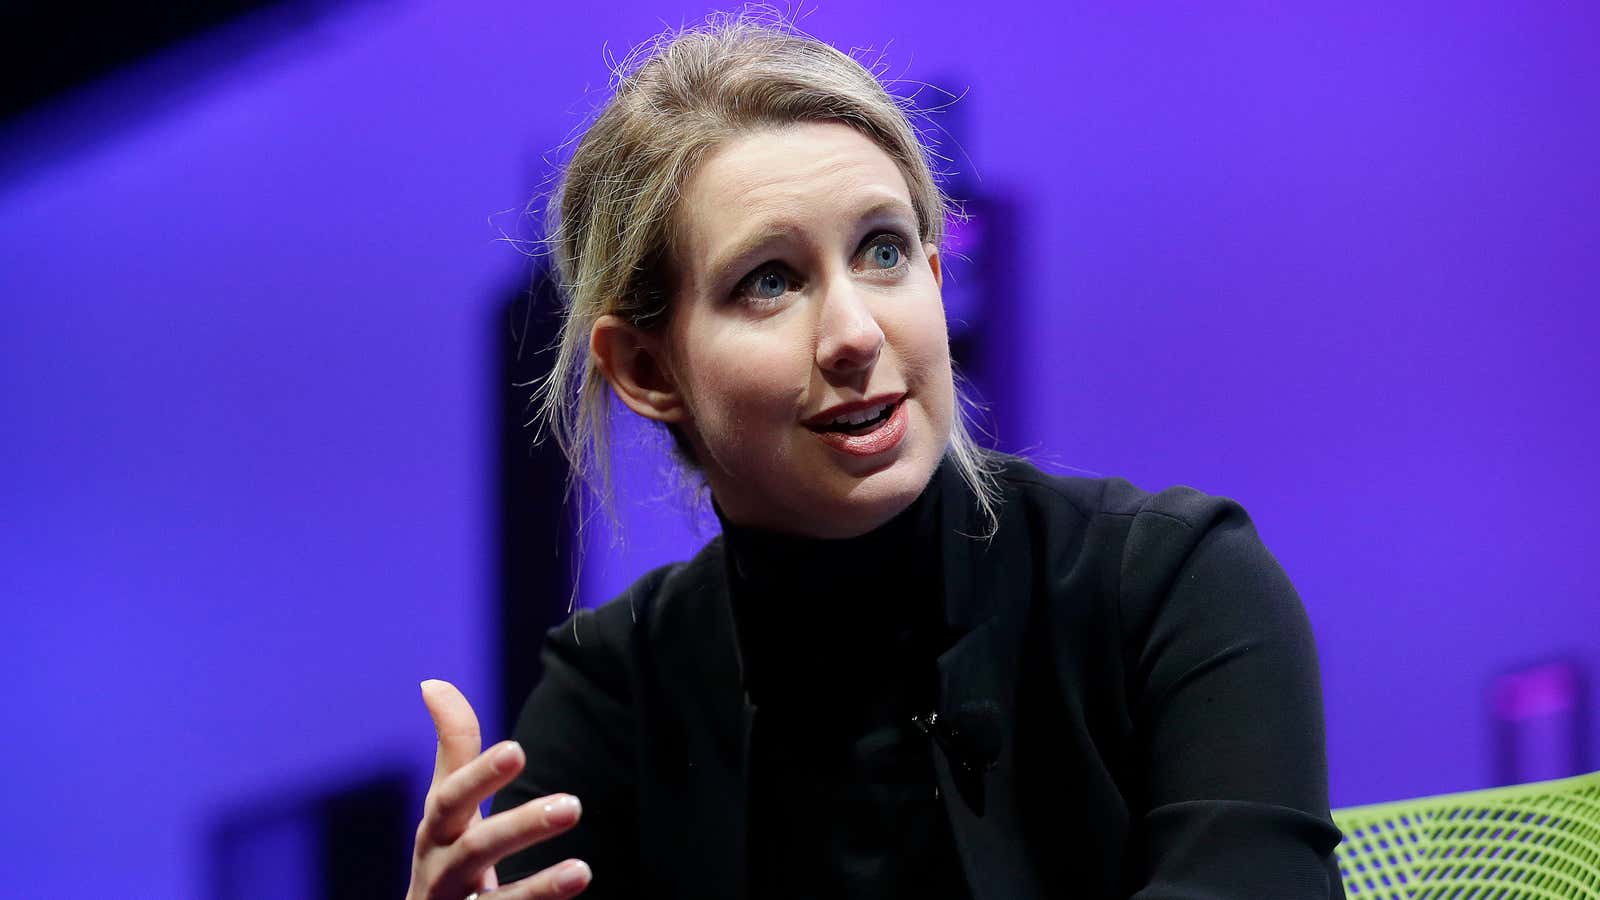 The boom-or-bust startup model prompts companies like Theranos to cut corners.